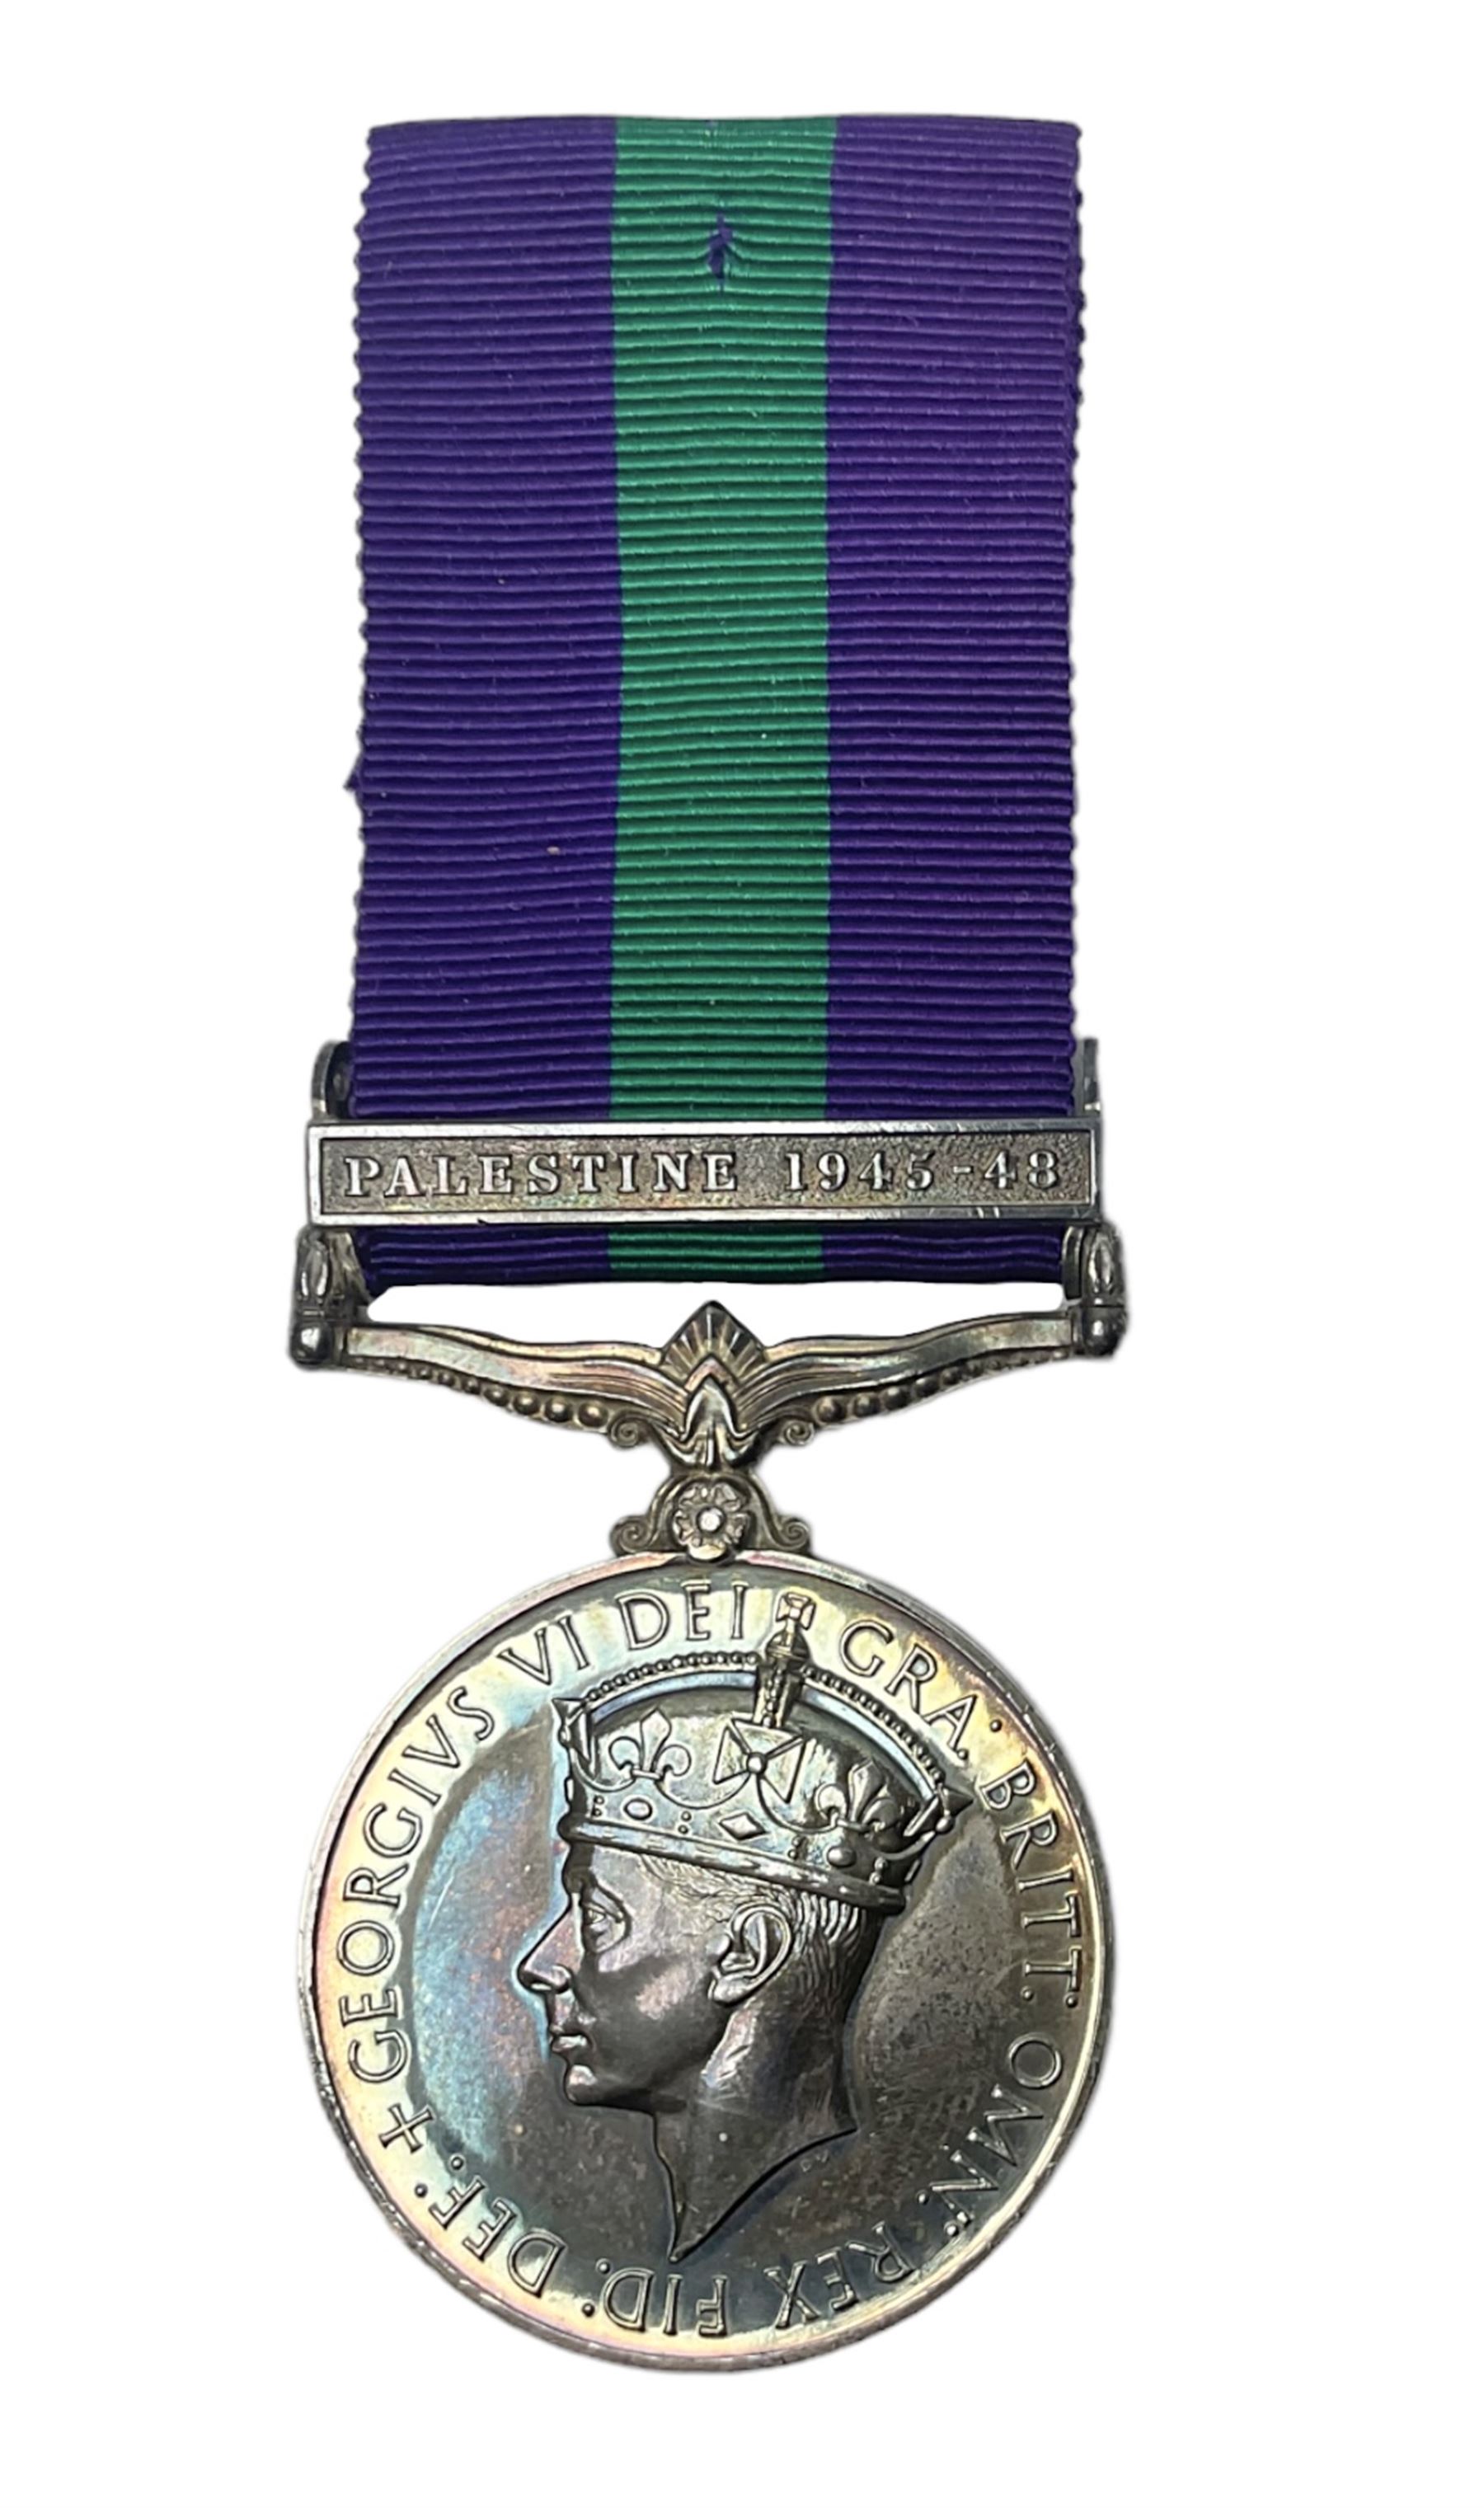 George VI General Service Medal with Palestine 1945-48 clasp awarded to 19117460 Pte. P. Tilmouth R.